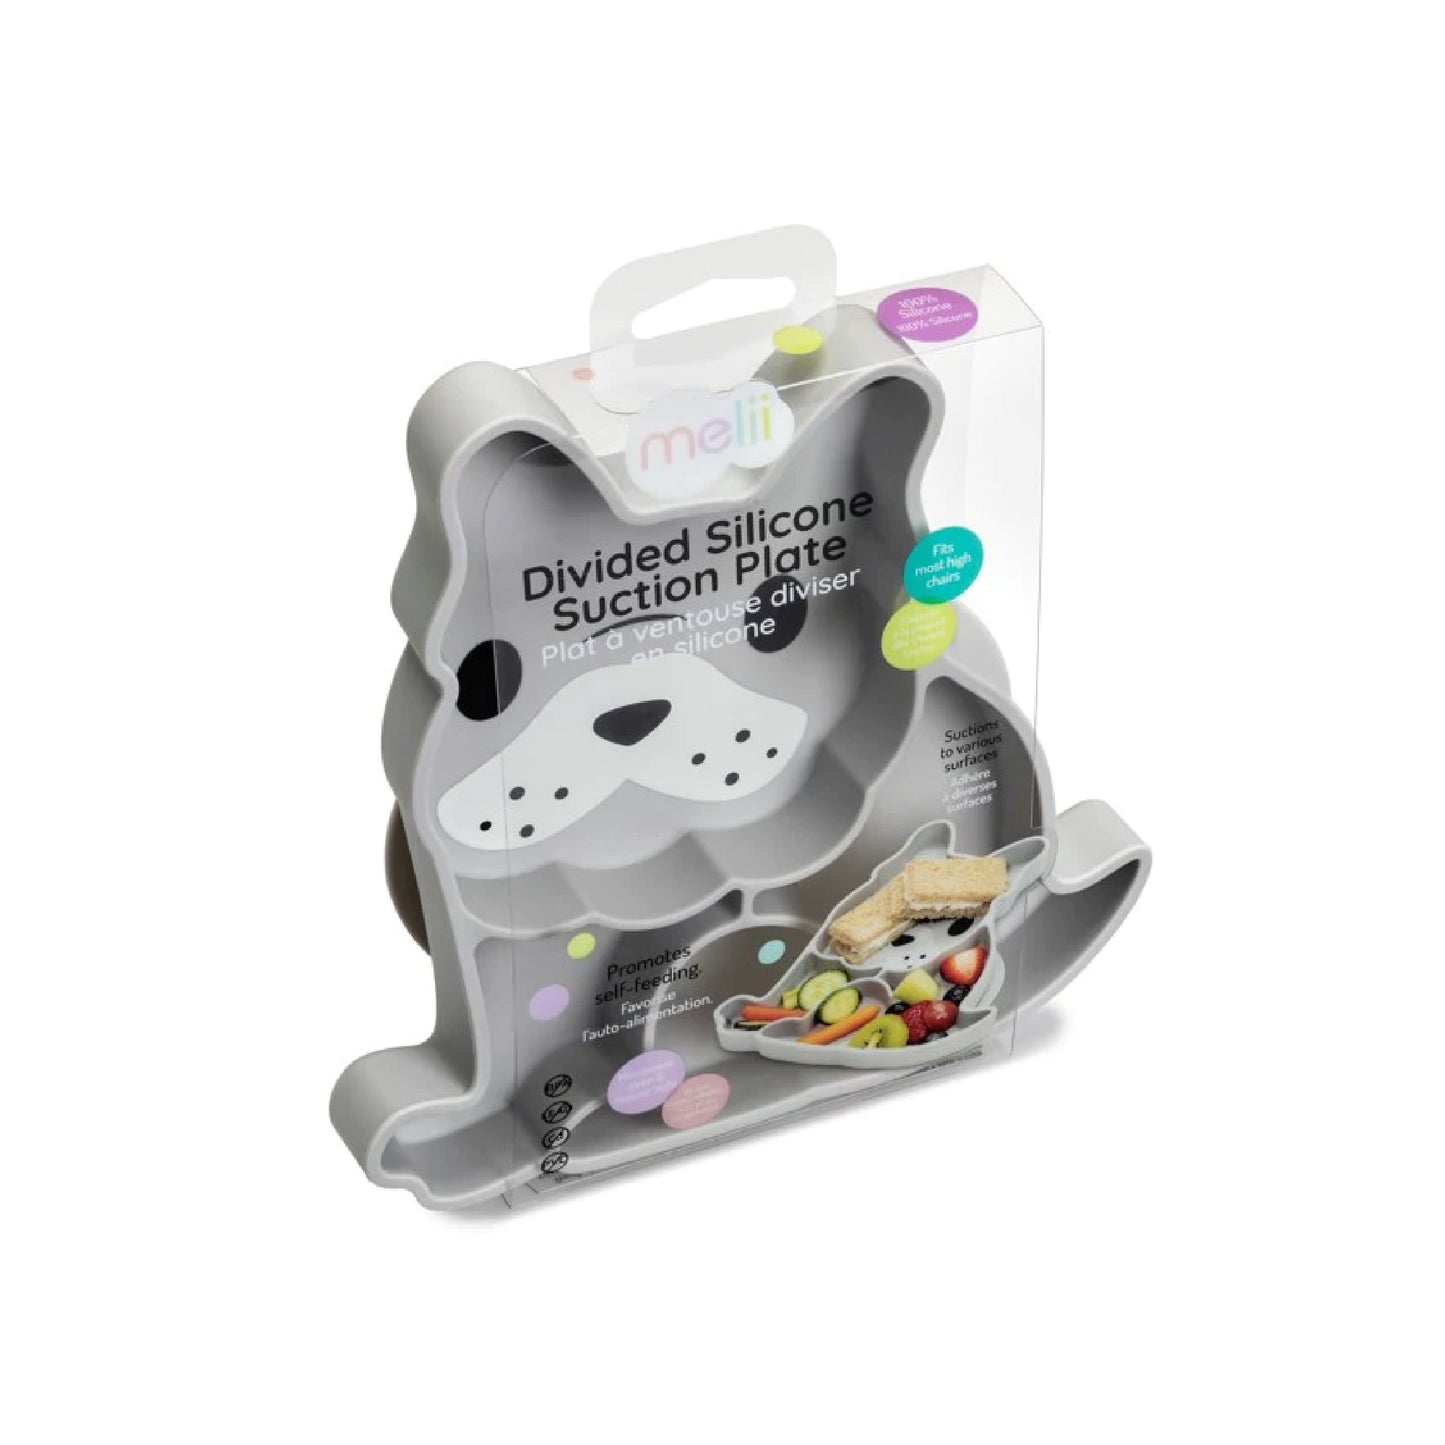 melii Silicone Suction Plate for Babies & Toddlers - Bulldog Division Plate for Picky Eaters - Secure Self Feeding Solution, BPA Free, Microwave & Dishwasher Safe